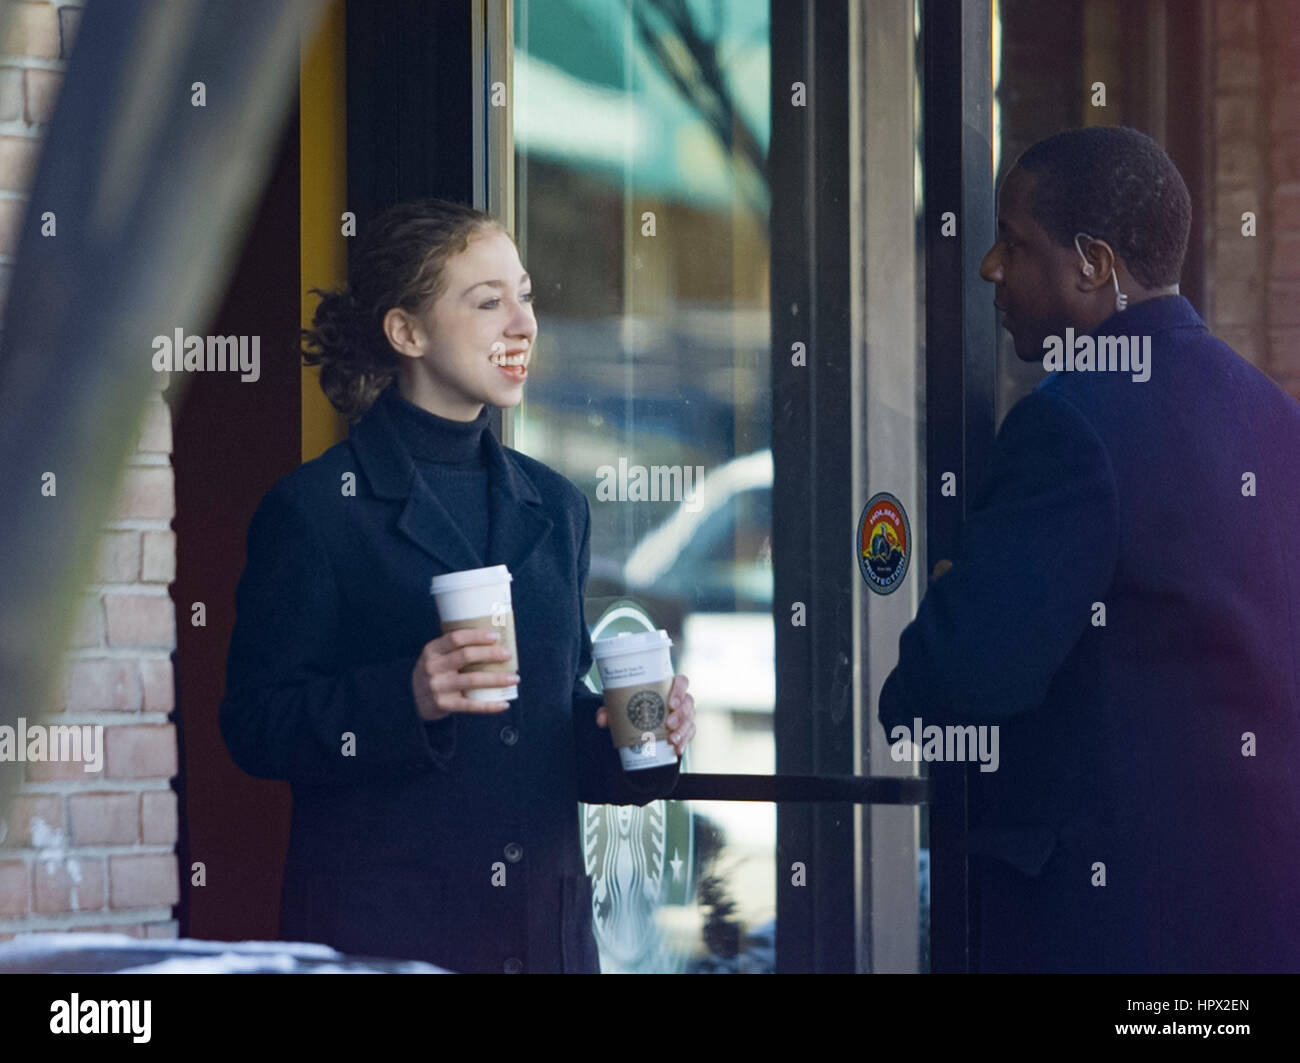 Chelsea Clinton leaves a Starbucks coffee shop in Chappaqua, NY on February  6, 2000. Photo by Francis Specker Stock Photo - Alamy